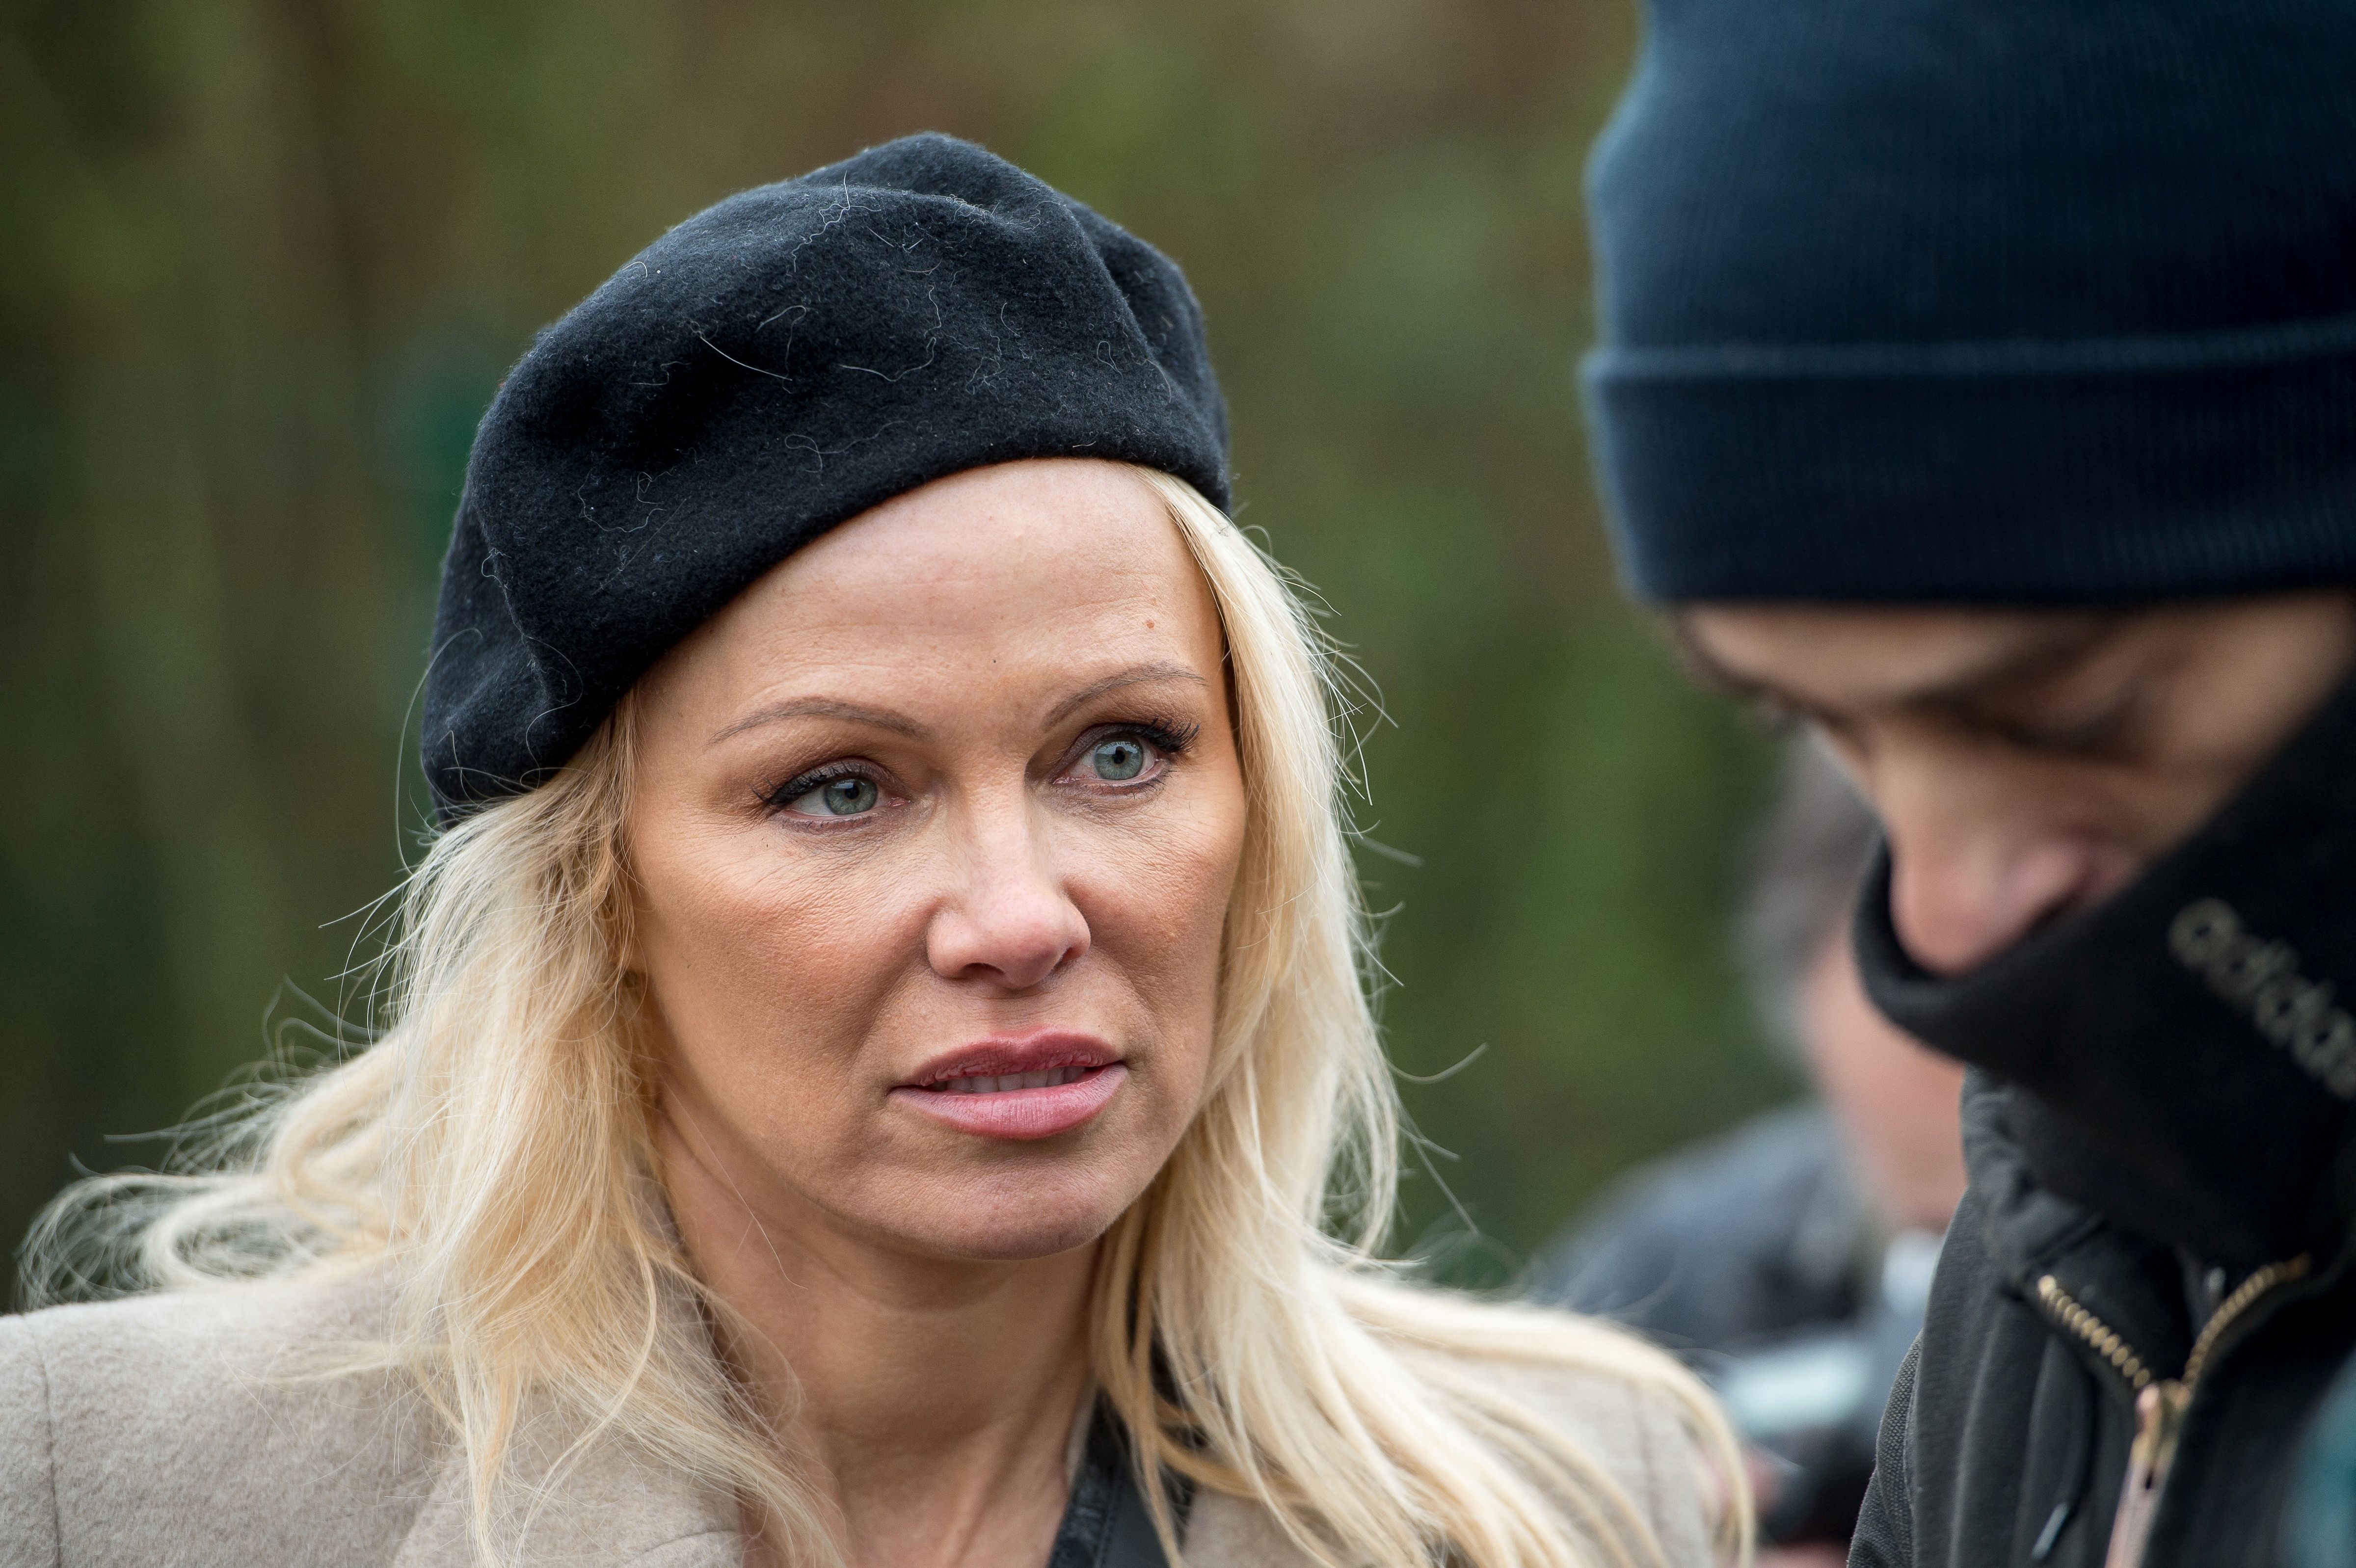 Pamela Anderson in the migrant and refugee camp of Grande-Synthe, northern France, on January 25, 2017. | Source: Getty Images